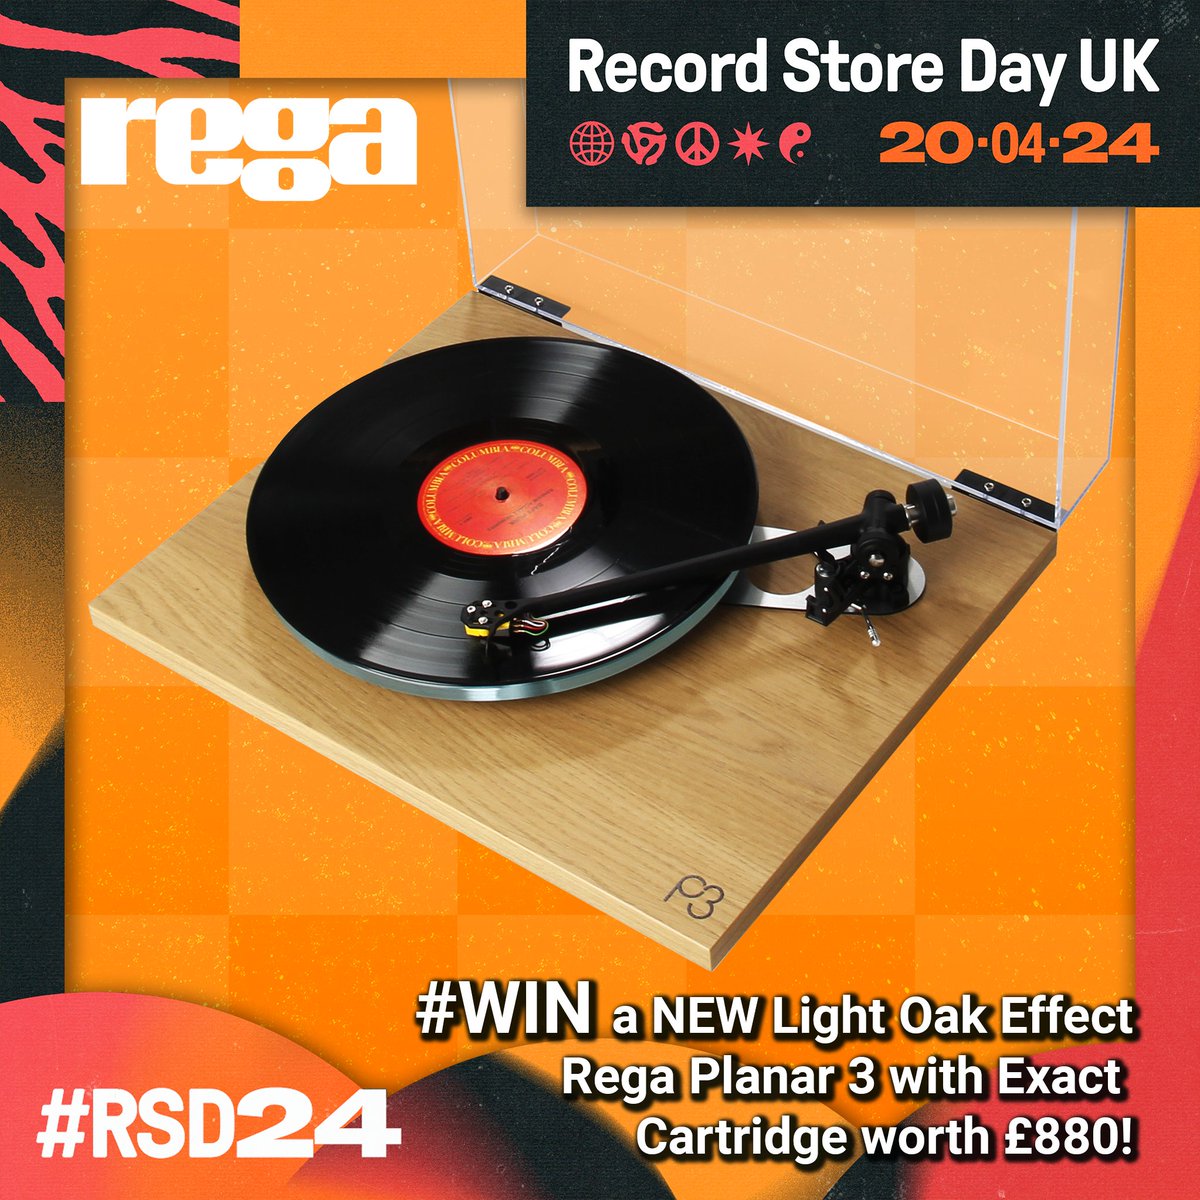 🎉LIKE AND RETWEET TO #WIN A #REGA TURNTABLE WORTH £880🎉 To celebrate @RSDUK 2024, we are giving away a brand new Rega Planar 3 in the NEW Light Oak Effect fitted with a Rega Exact cartridge. Find out more about this amazing prize here: rb.gy/8kxbgh The lucky winner